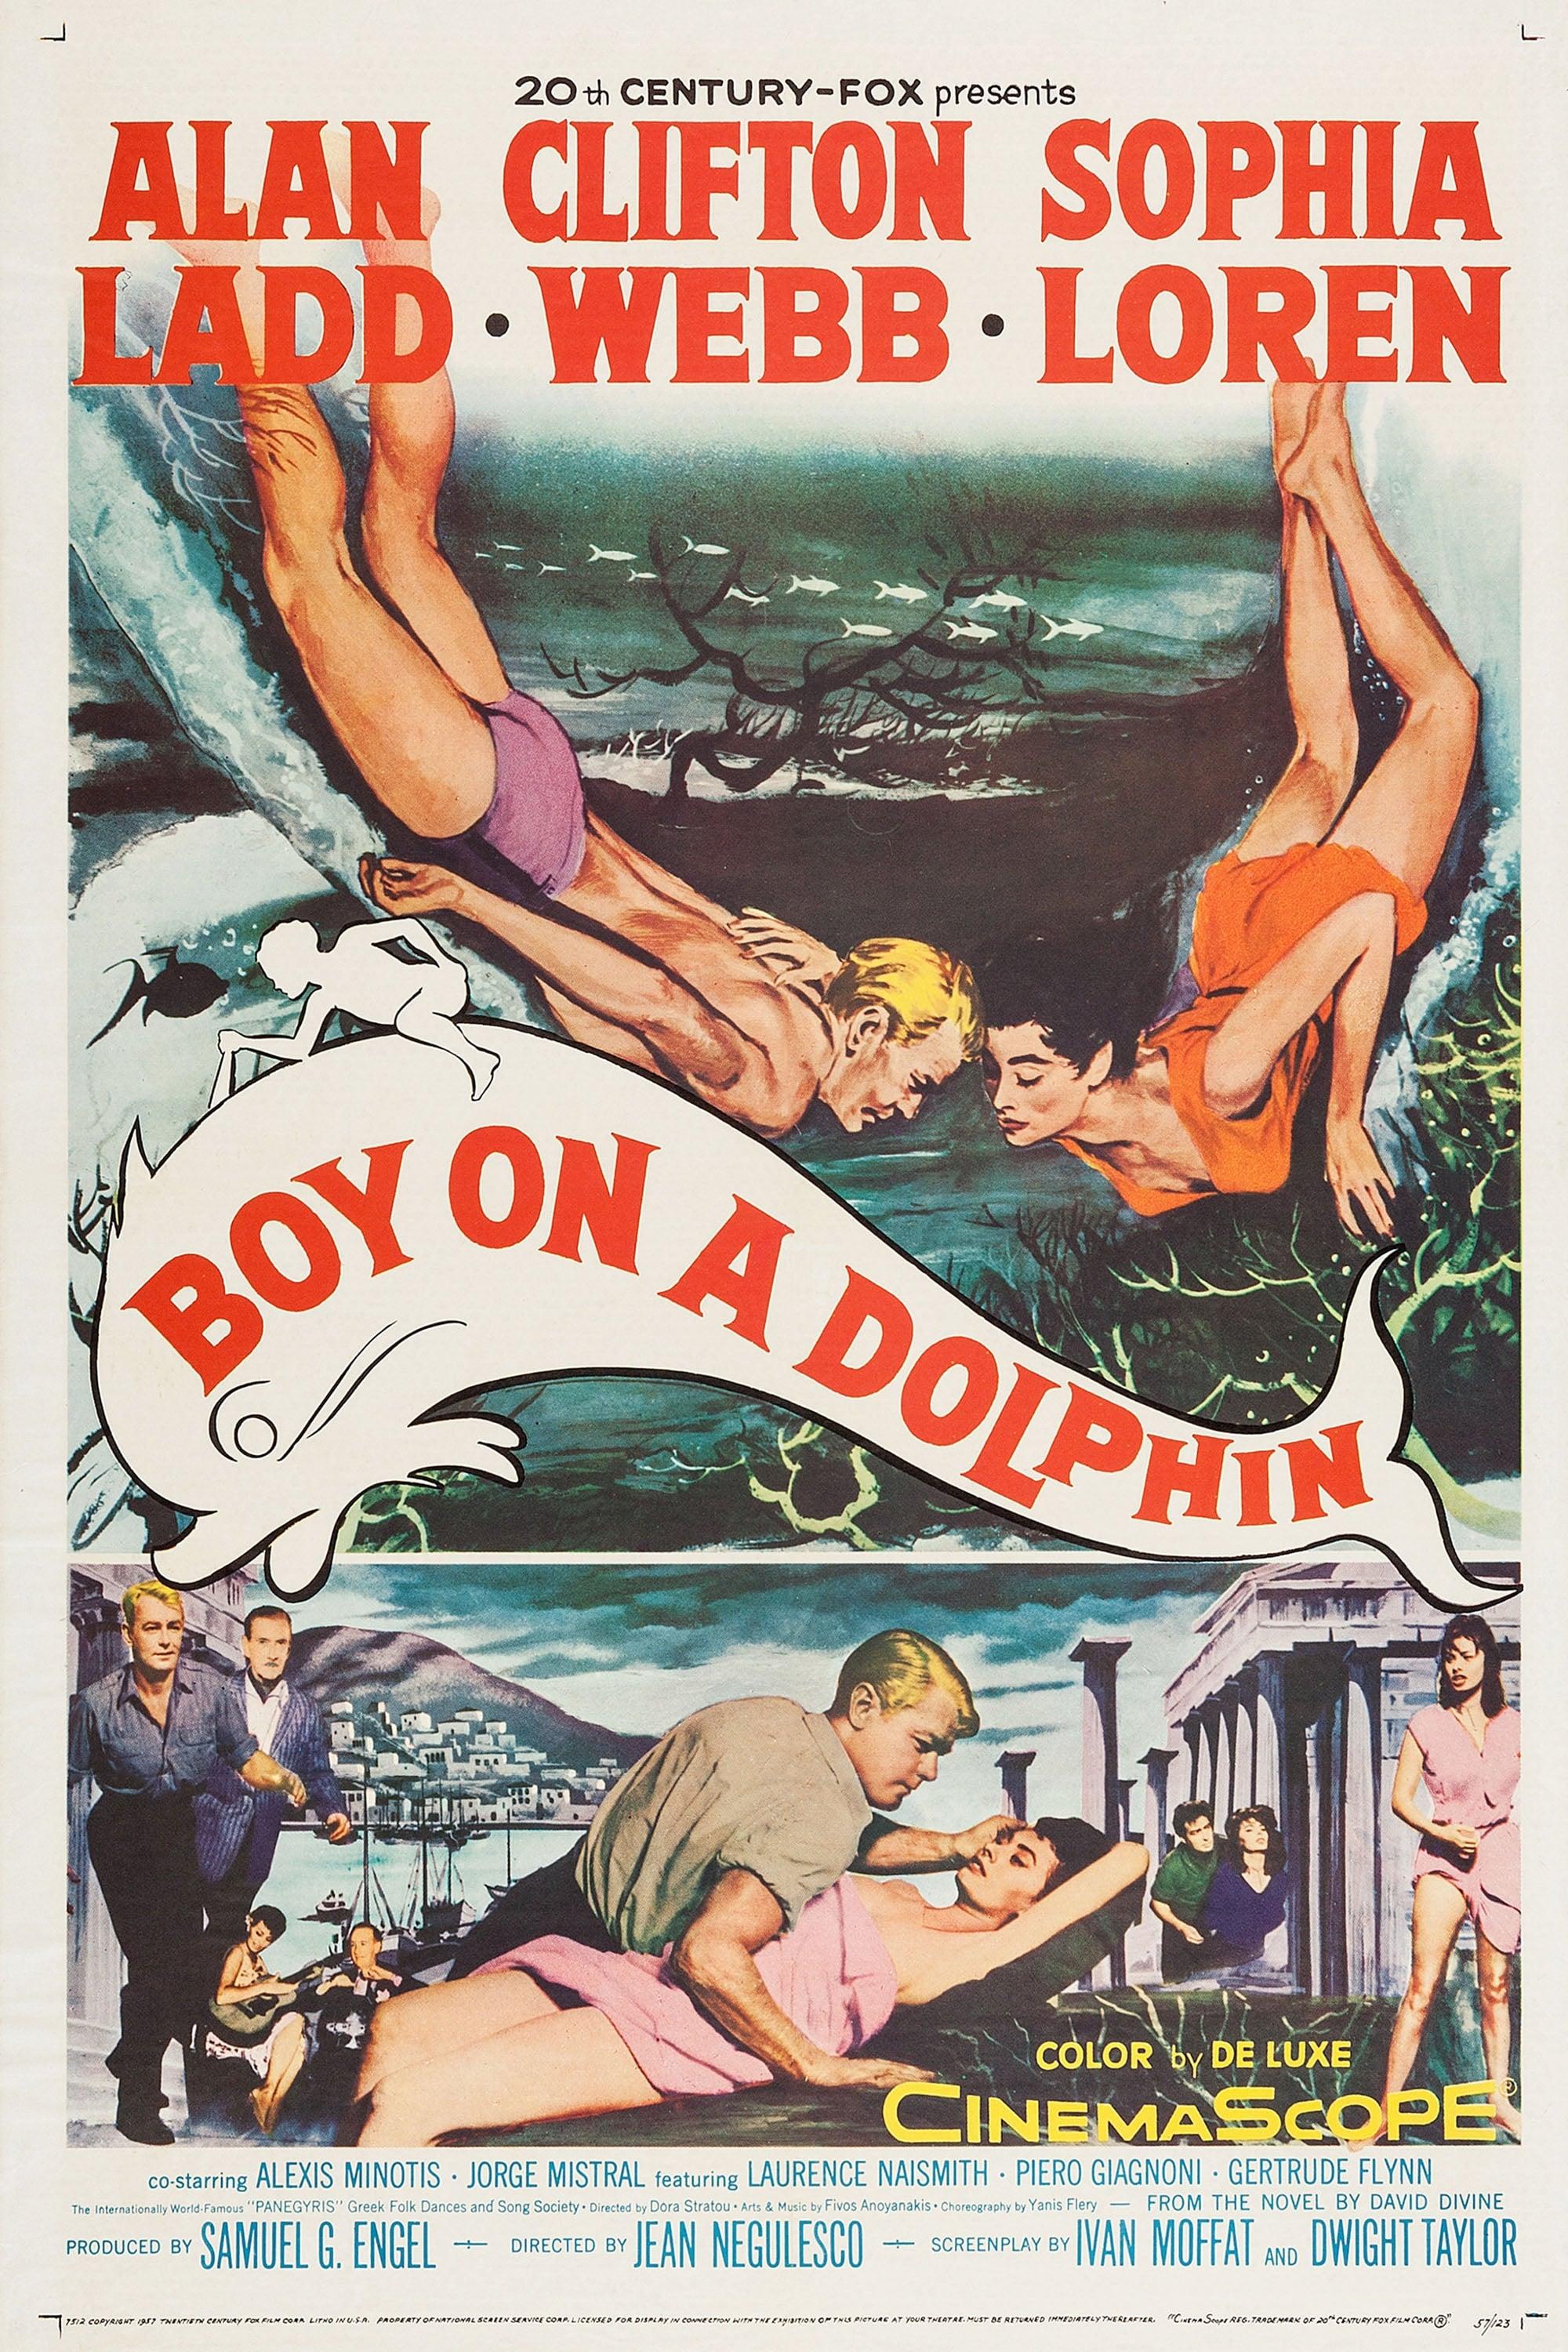 Boy on a Dolphin poster